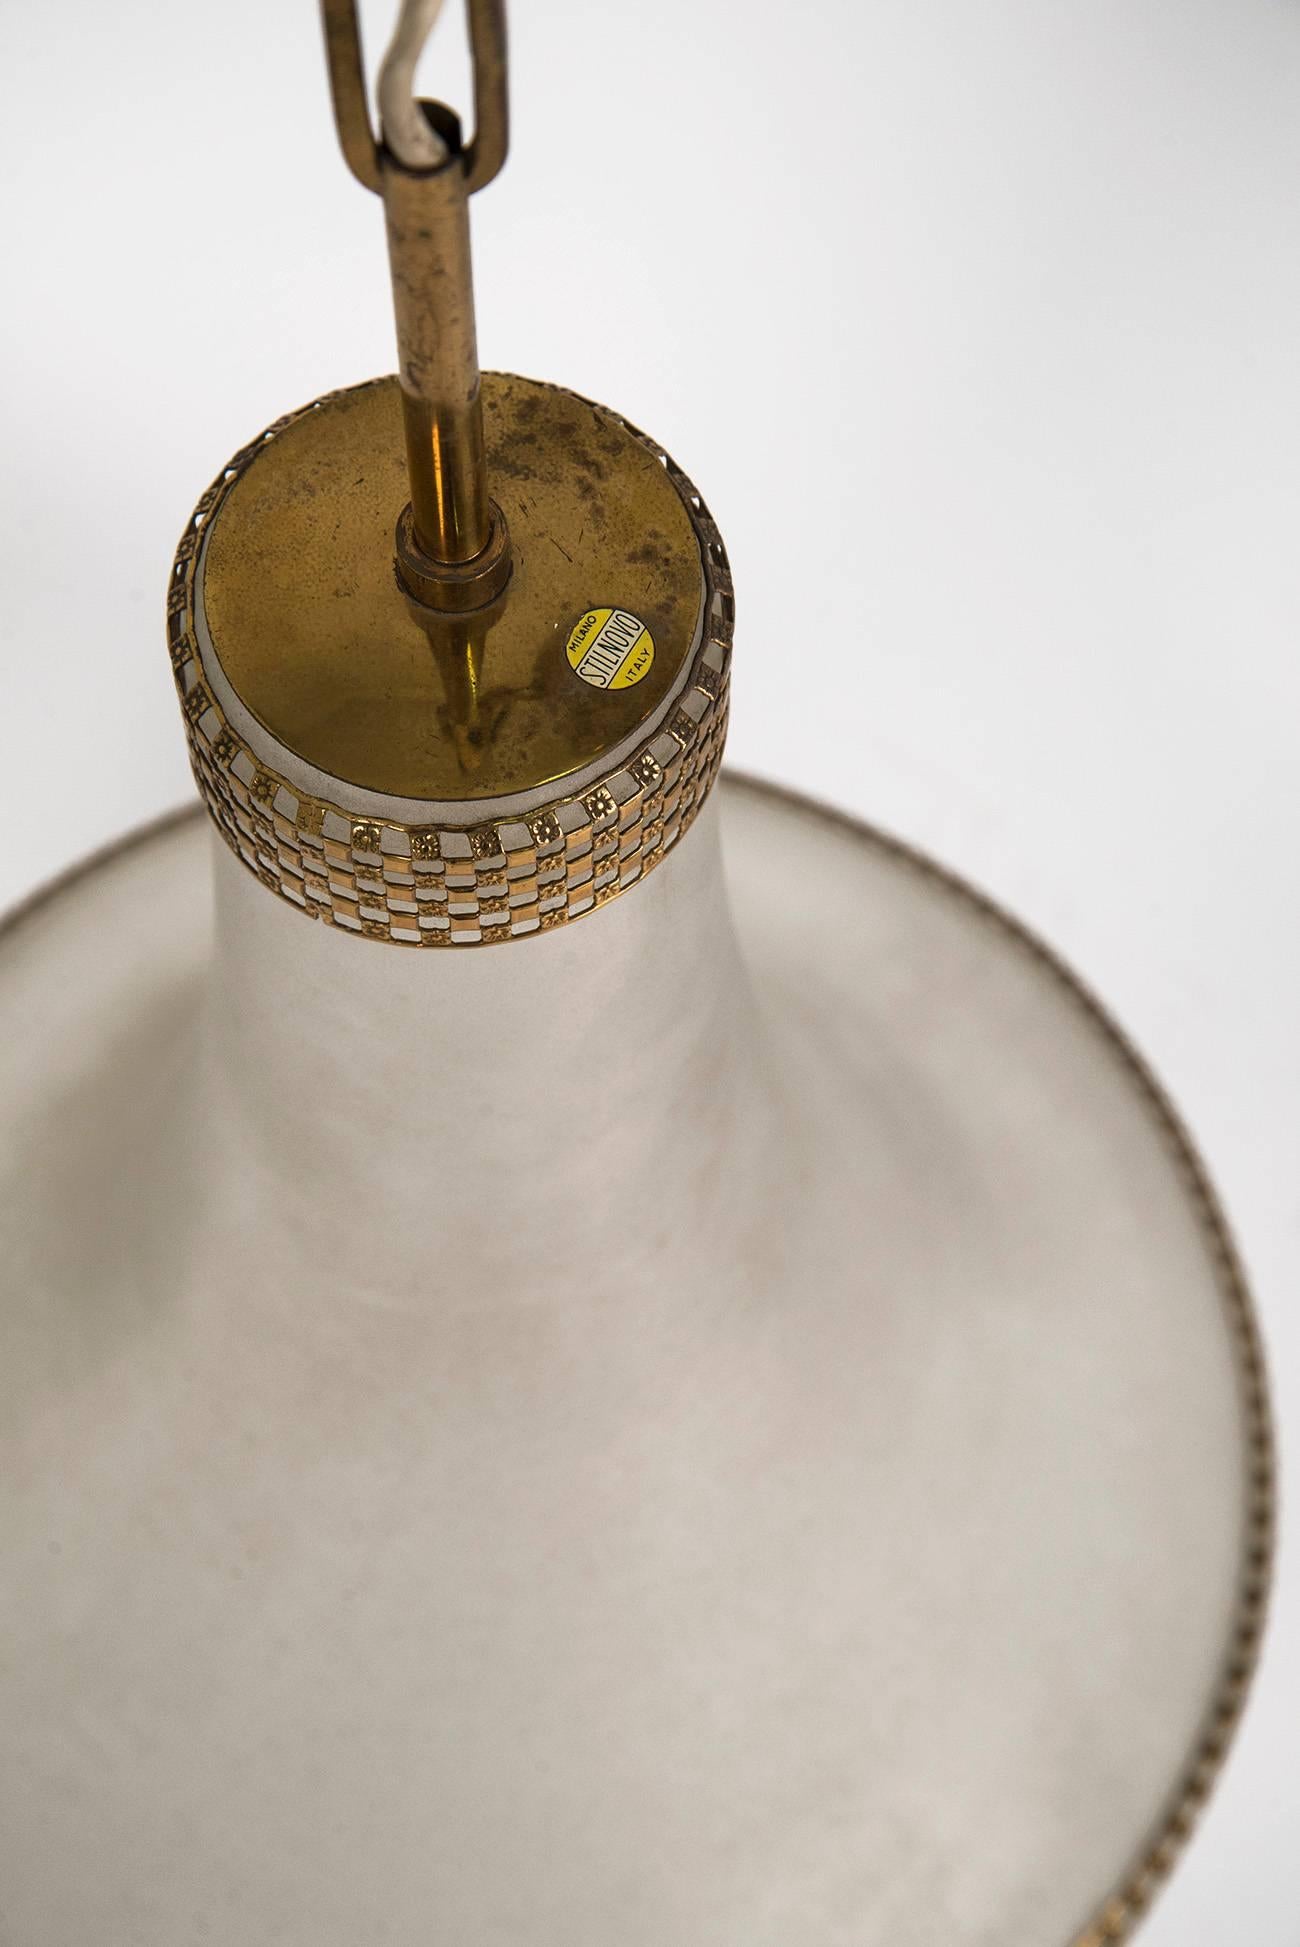 Pendant with a frosted glass diffuser and elegant brass crowns decorations, manufactured by Stilnovo in the 1950s. Original manufacturer's decalcomania on the upper part of the shade.